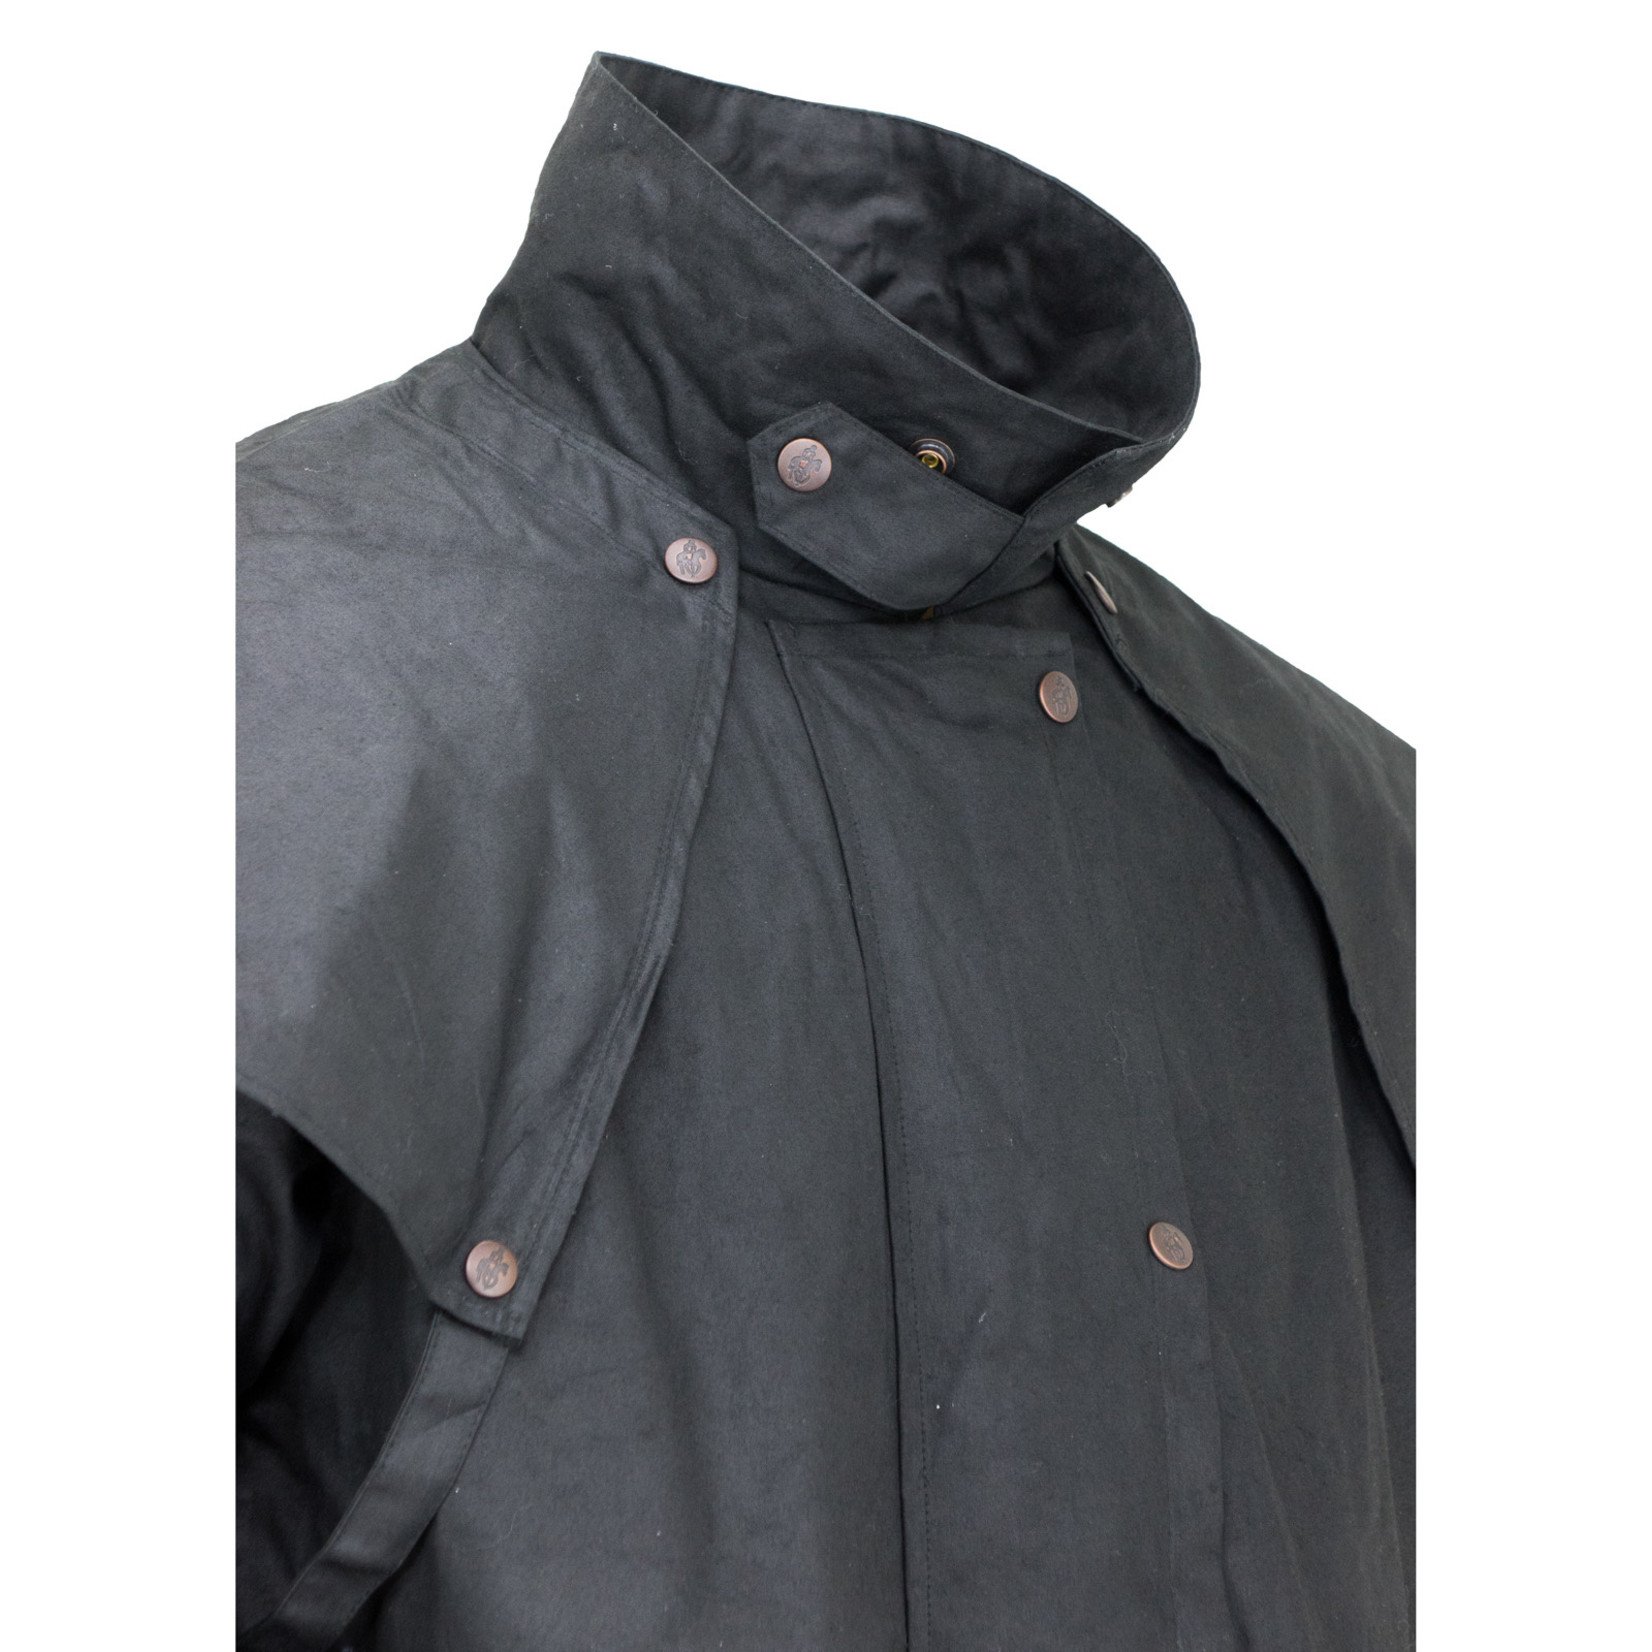 Outback Low Rider Duster Coat Black 2042